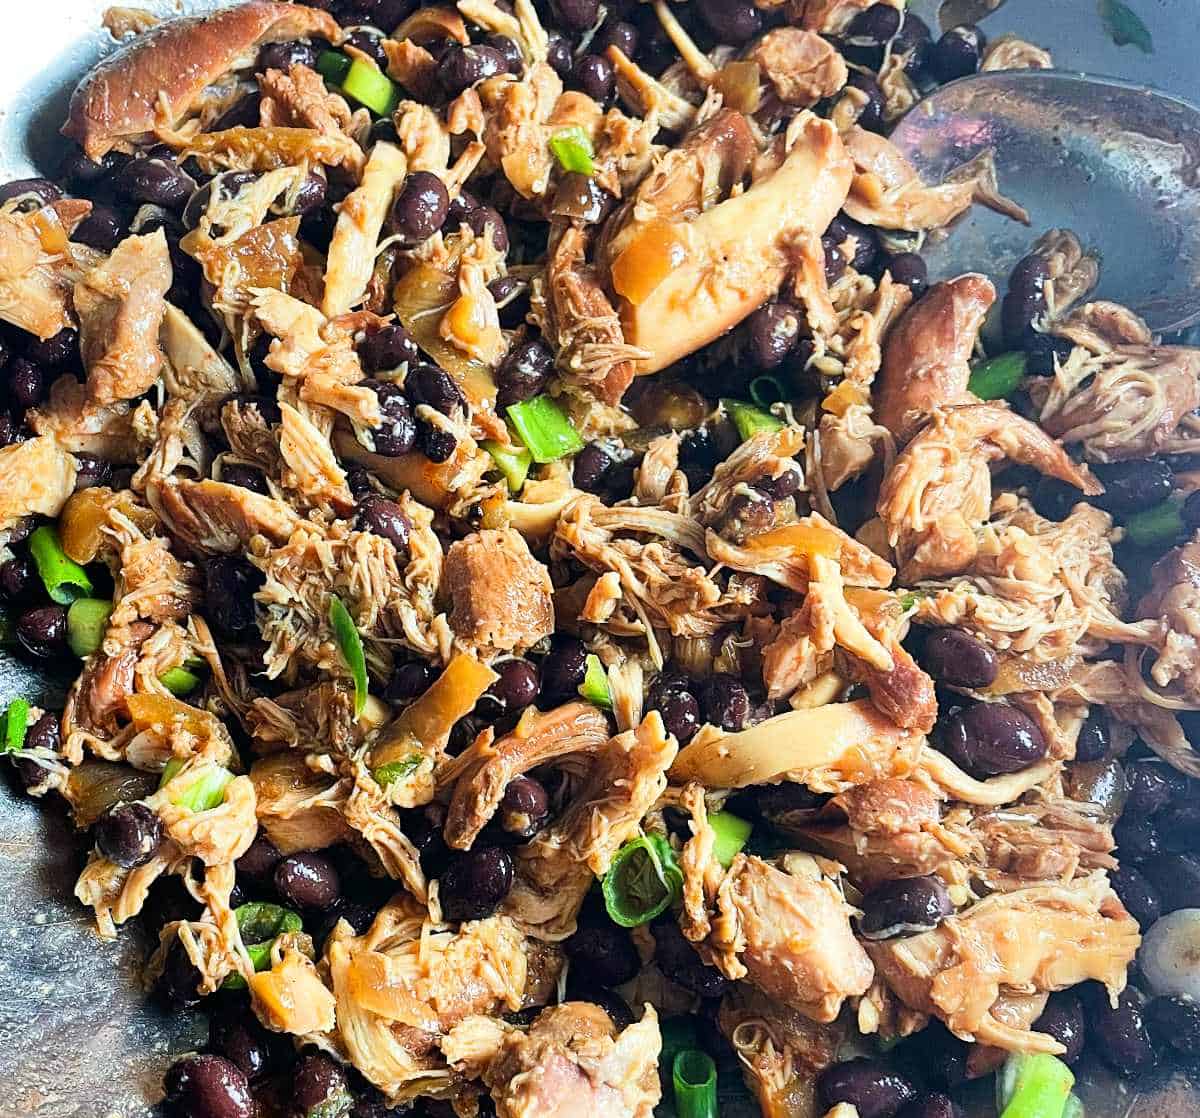 shredded chicken with scallions and black beans in a silver bowl.